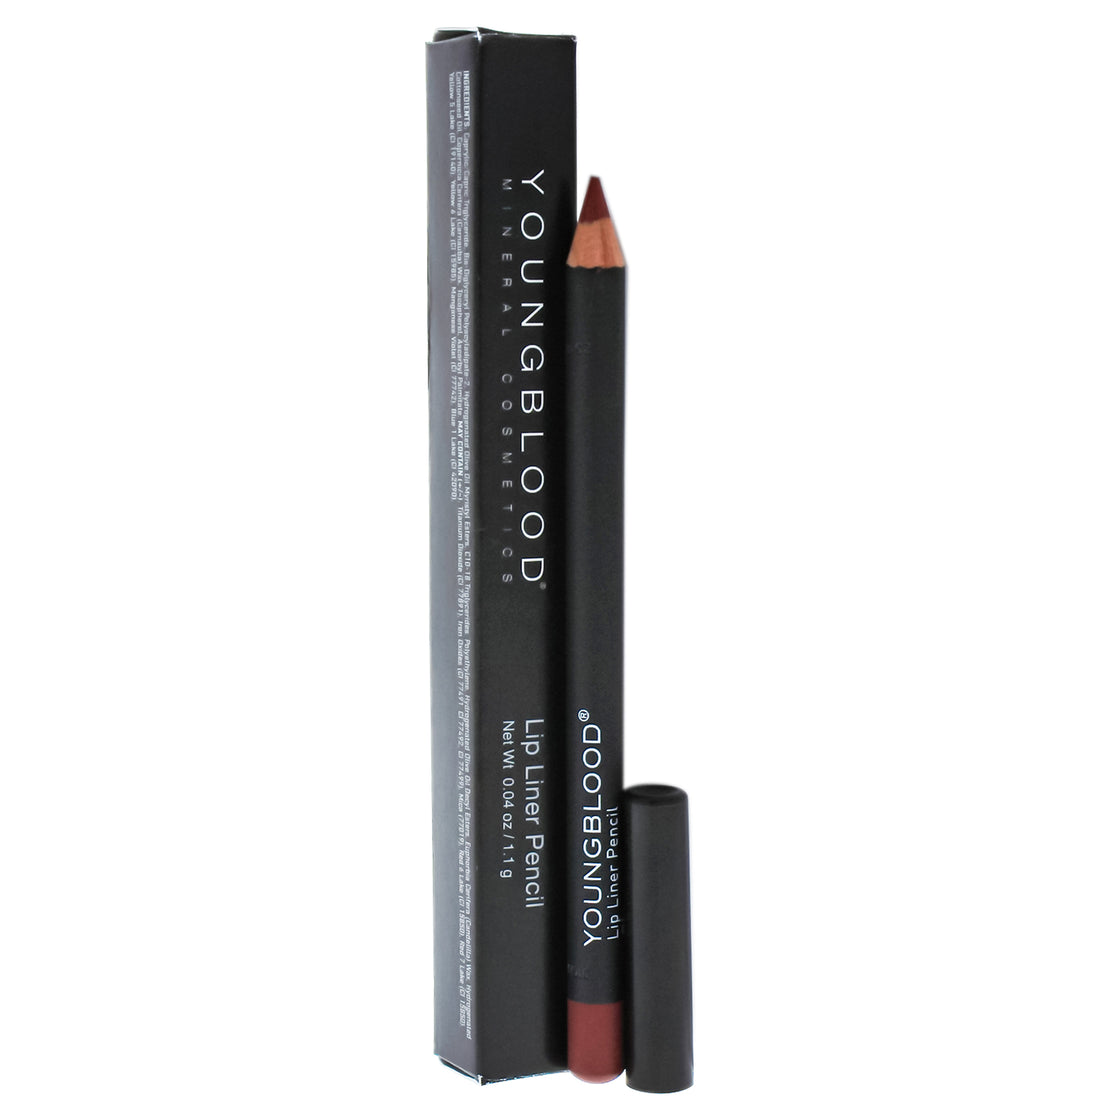 Lip Liner Pencil - Plum by Youngblood for Women - 0.04 oz Lip Liner